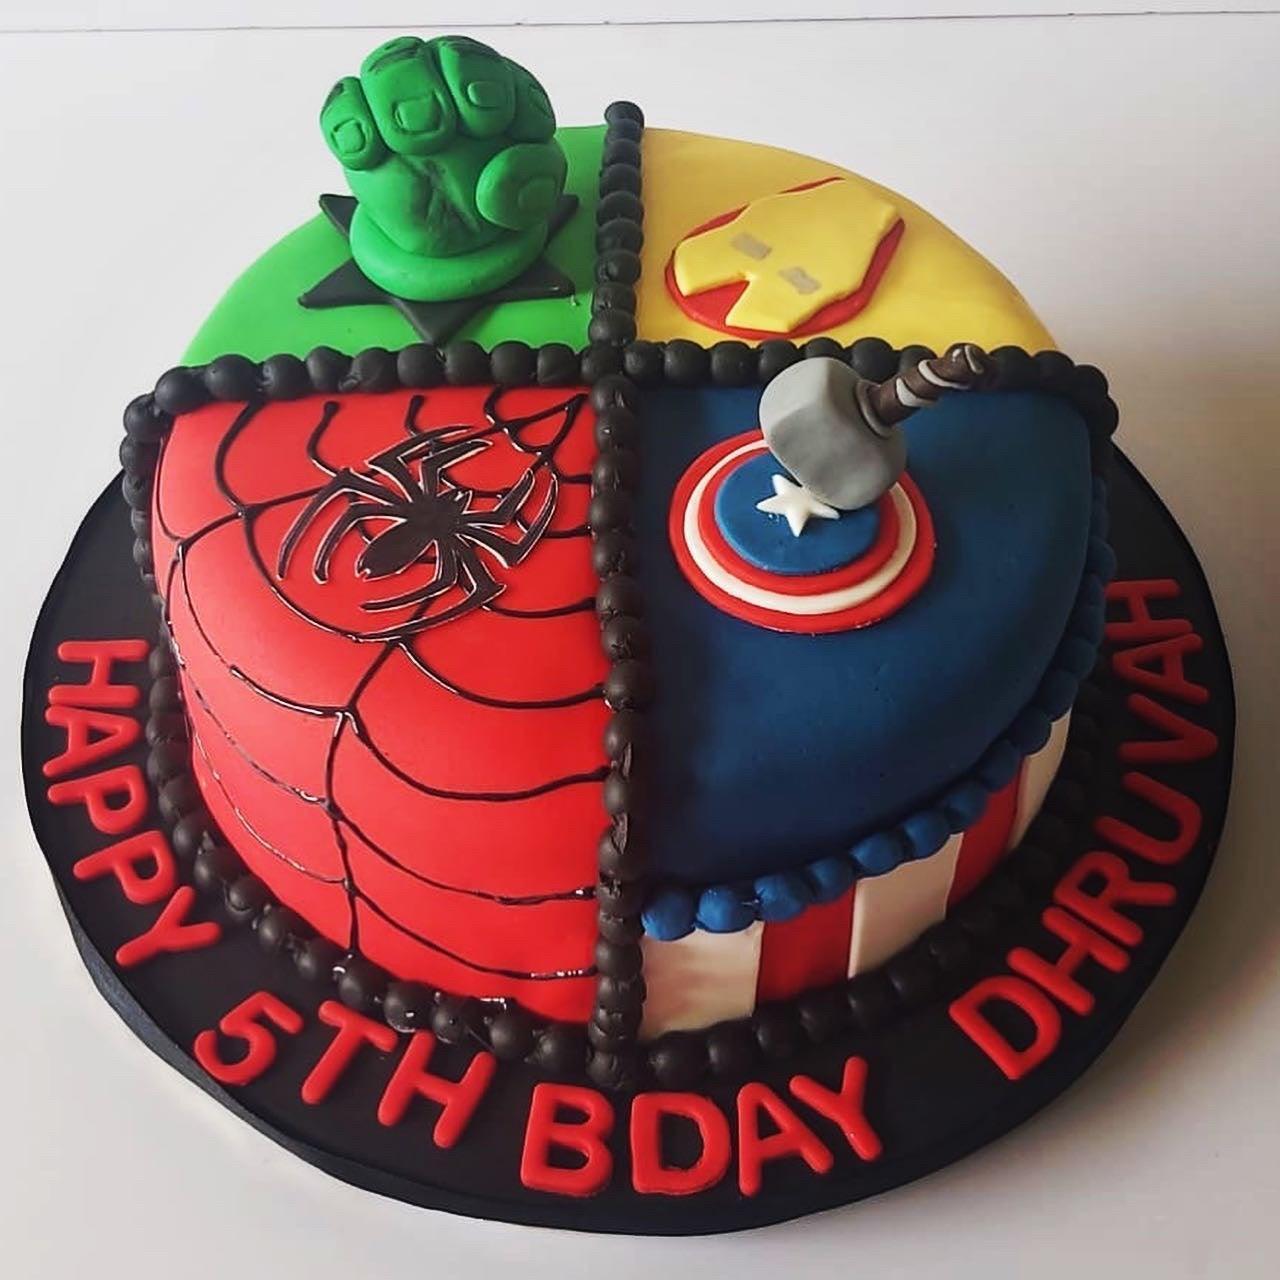 Collection of Amazing 4K Avengers Cake Images – 999+ Images!